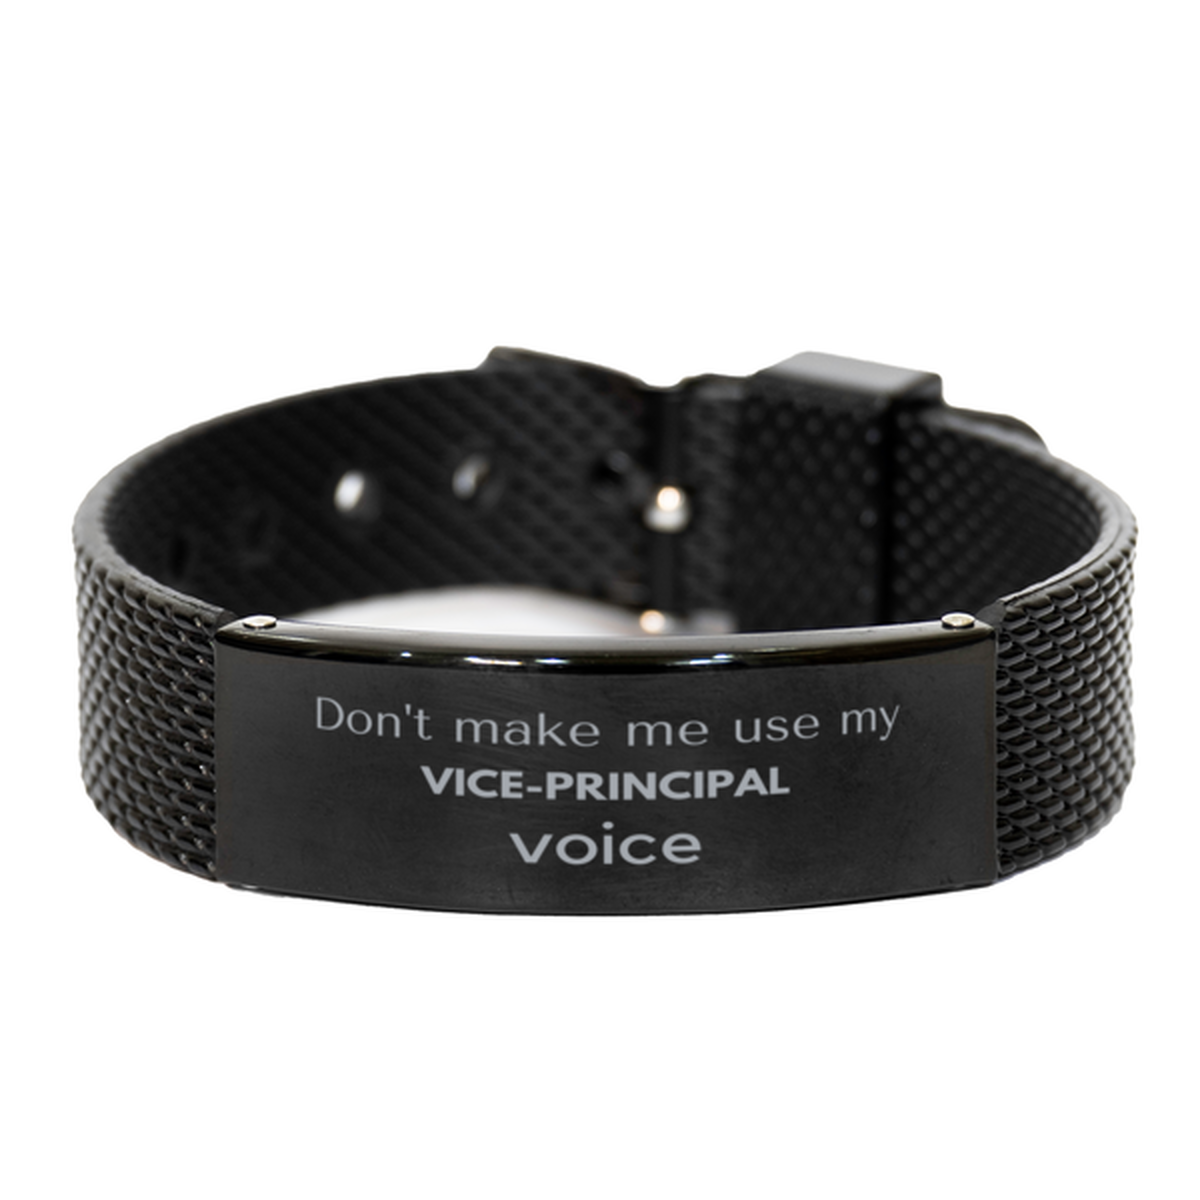 Don't make me use my Vice-principal voice, Sarcasm Vice-principal Gifts, Christmas Vice-principal Black Shark Mesh Bracelet Birthday Unique Gifts For Vice-principal Coworkers, Men, Women, Colleague, Friends